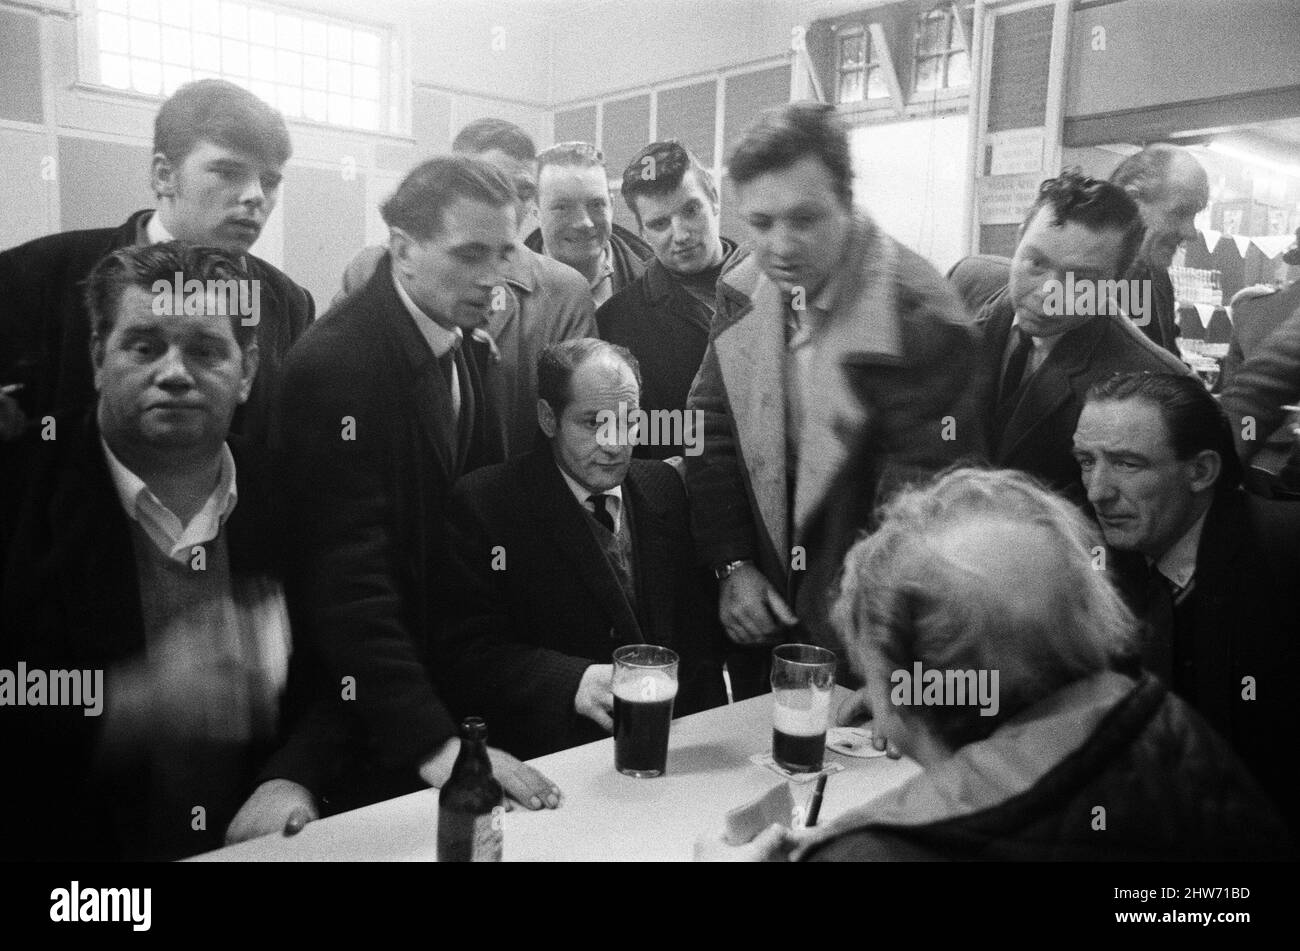 General scene of the fishing industry in Hull. Taken around the time of the Triple Trawler Tragedy, which was the sinking of three trawlers from the British fishing port of Kingston upon Hull during January and February 1968. Pictured, trawler men in the 'Star and Garter' pub. February 1968. Stock Photo